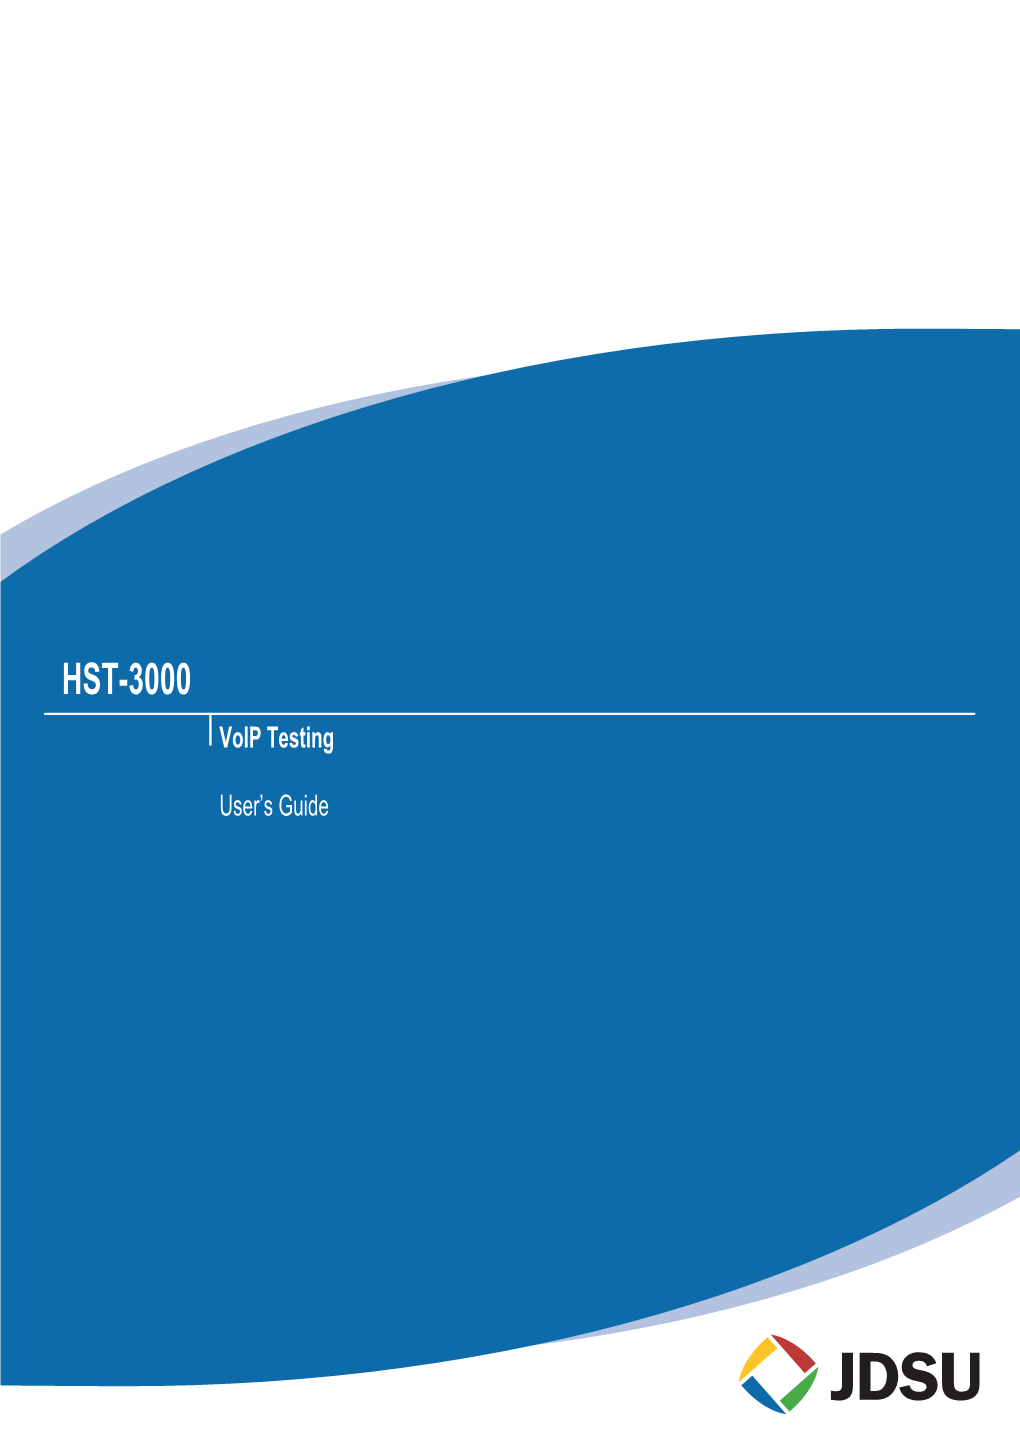 HST-3000 Voip Testing User's Guide